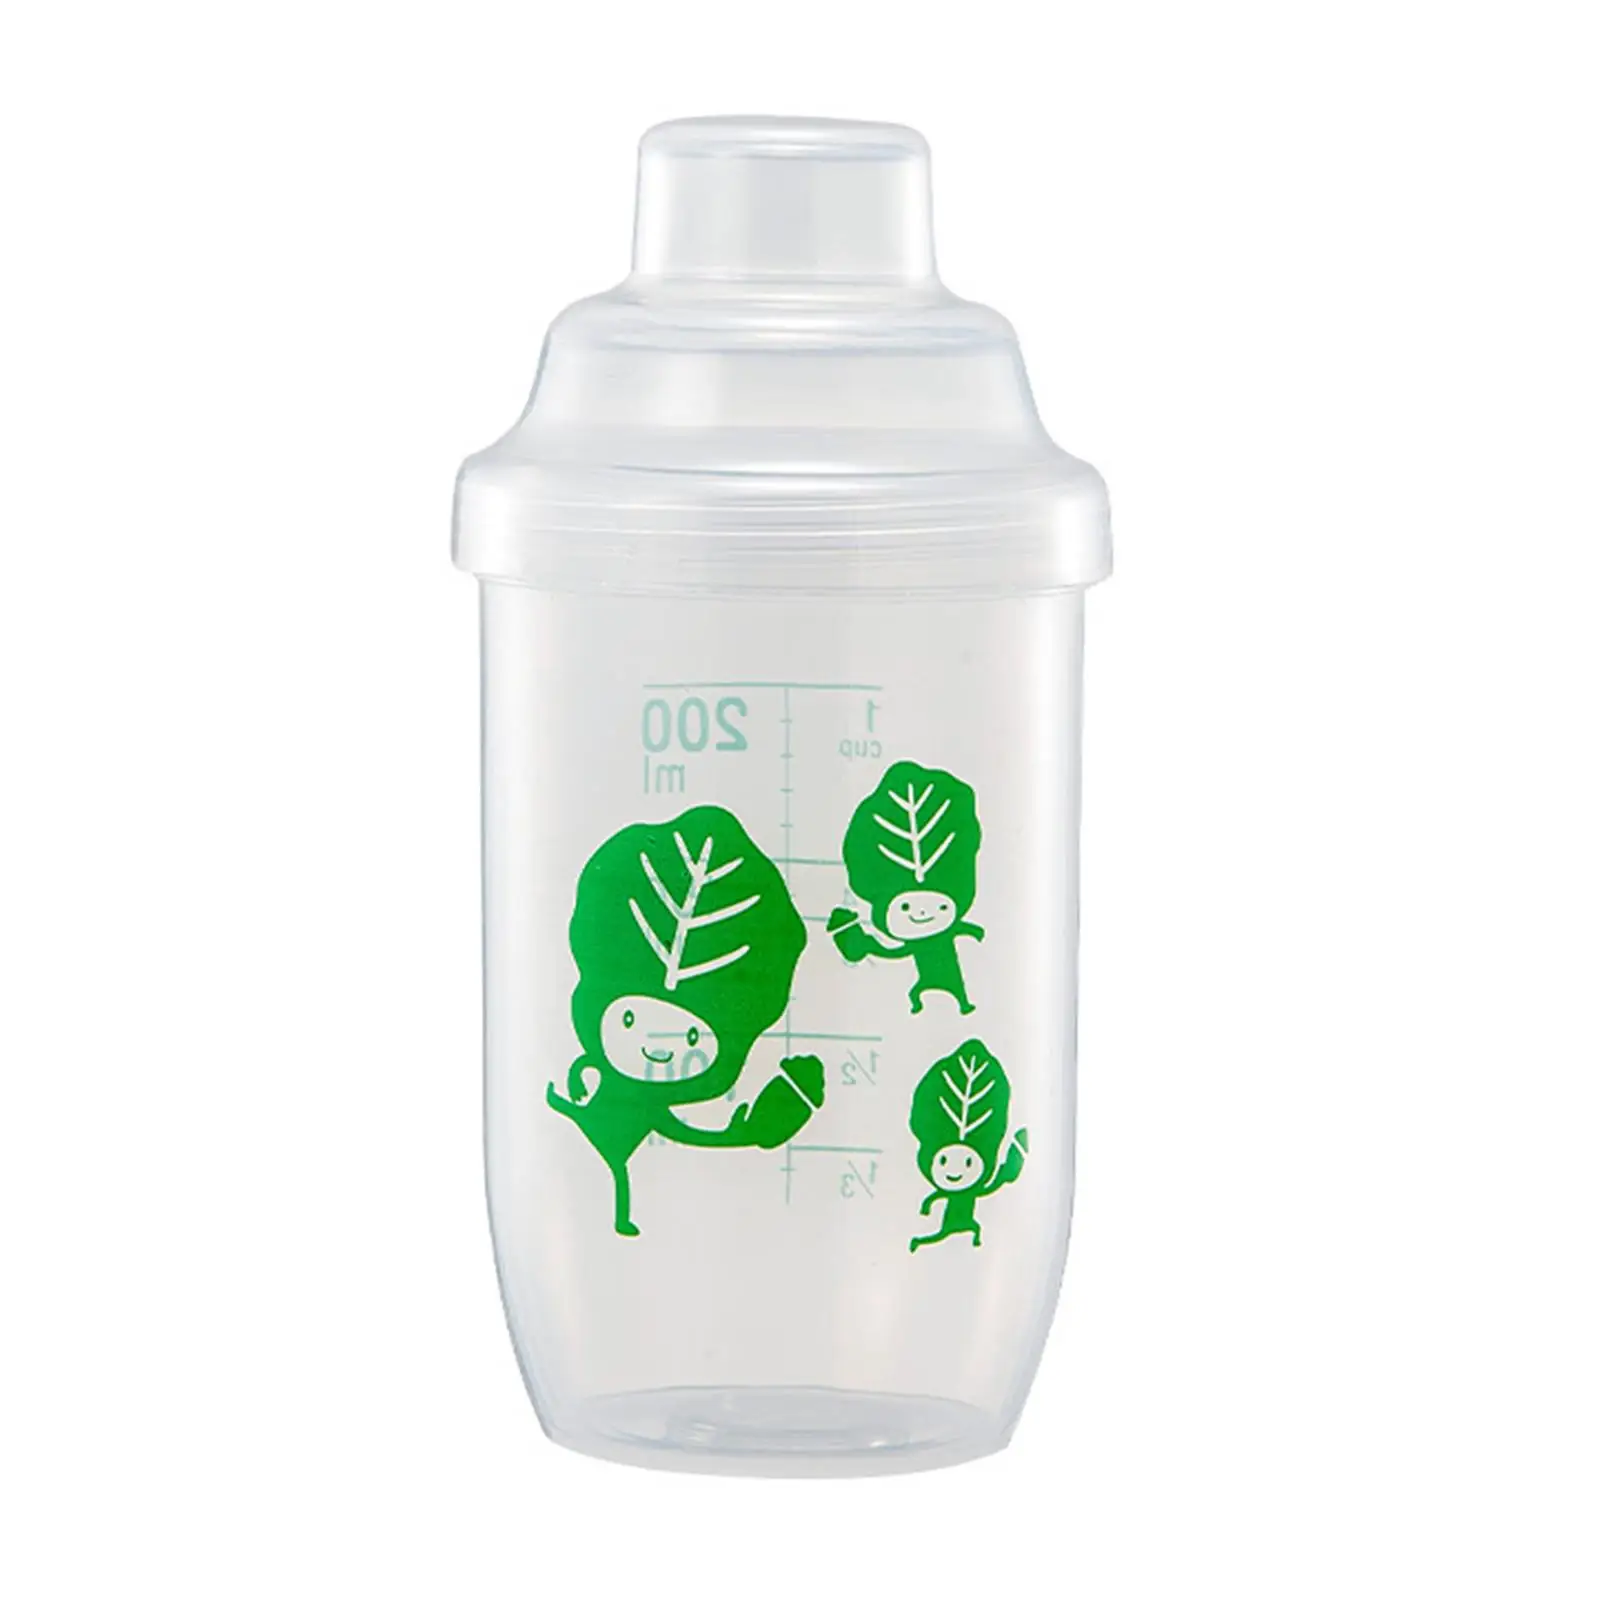 Sports Shaker Bottle Easy to Clean with Scale Water Bottle Shaker Cups Milkshake Cup for Water Milkshakes Milk Outdoor